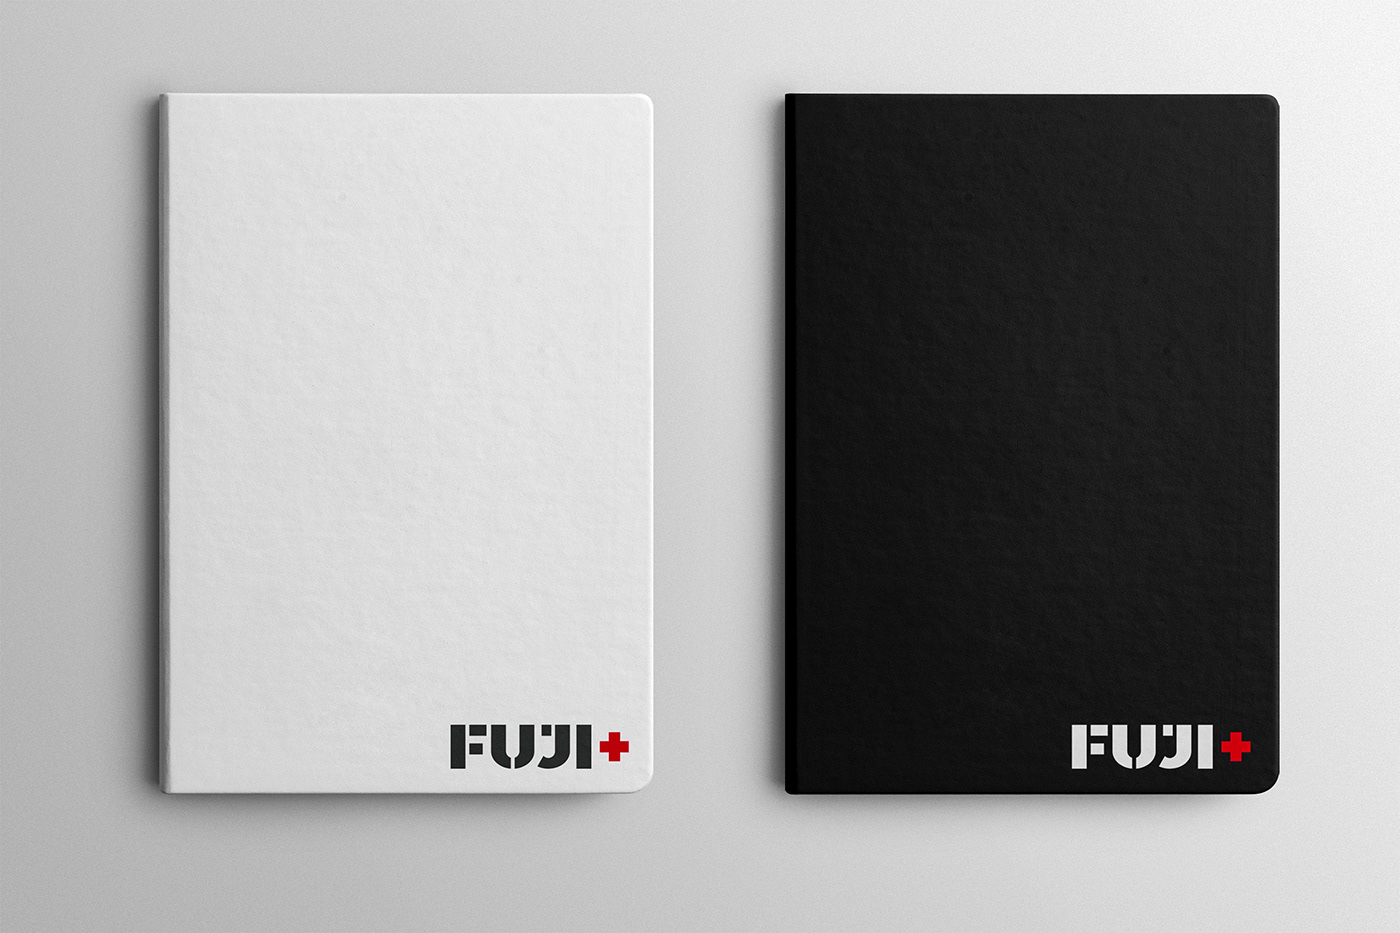 A photo showing a sample of the new Fuji+ logotype's application